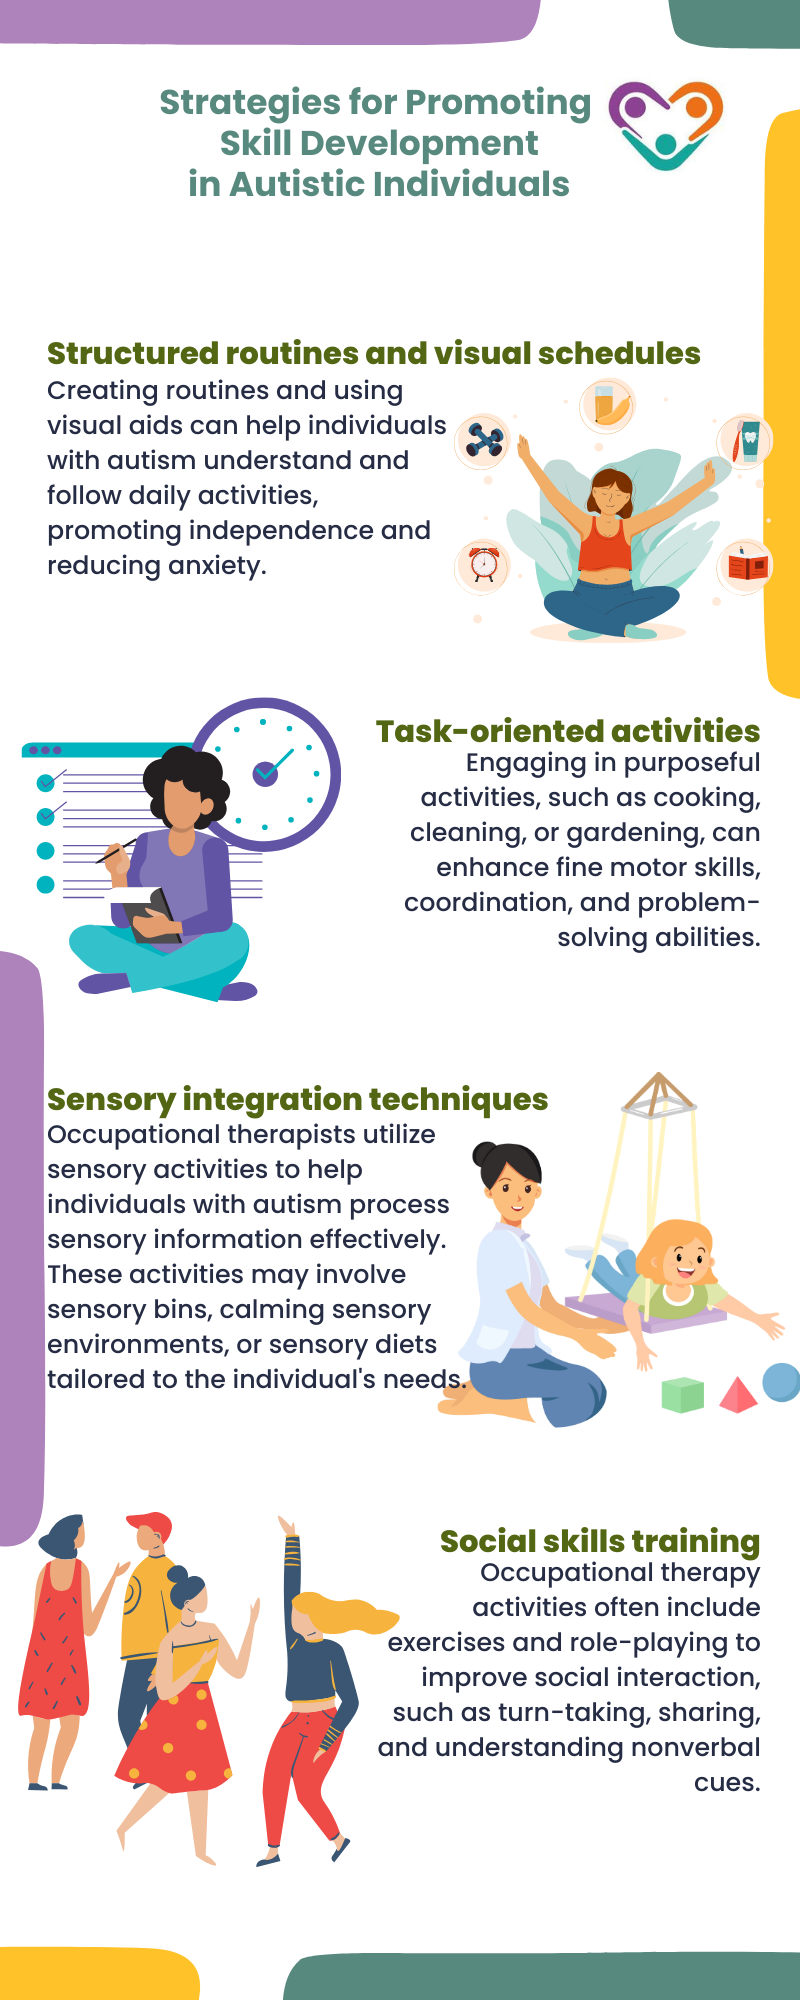 occupational therapy activities for autism